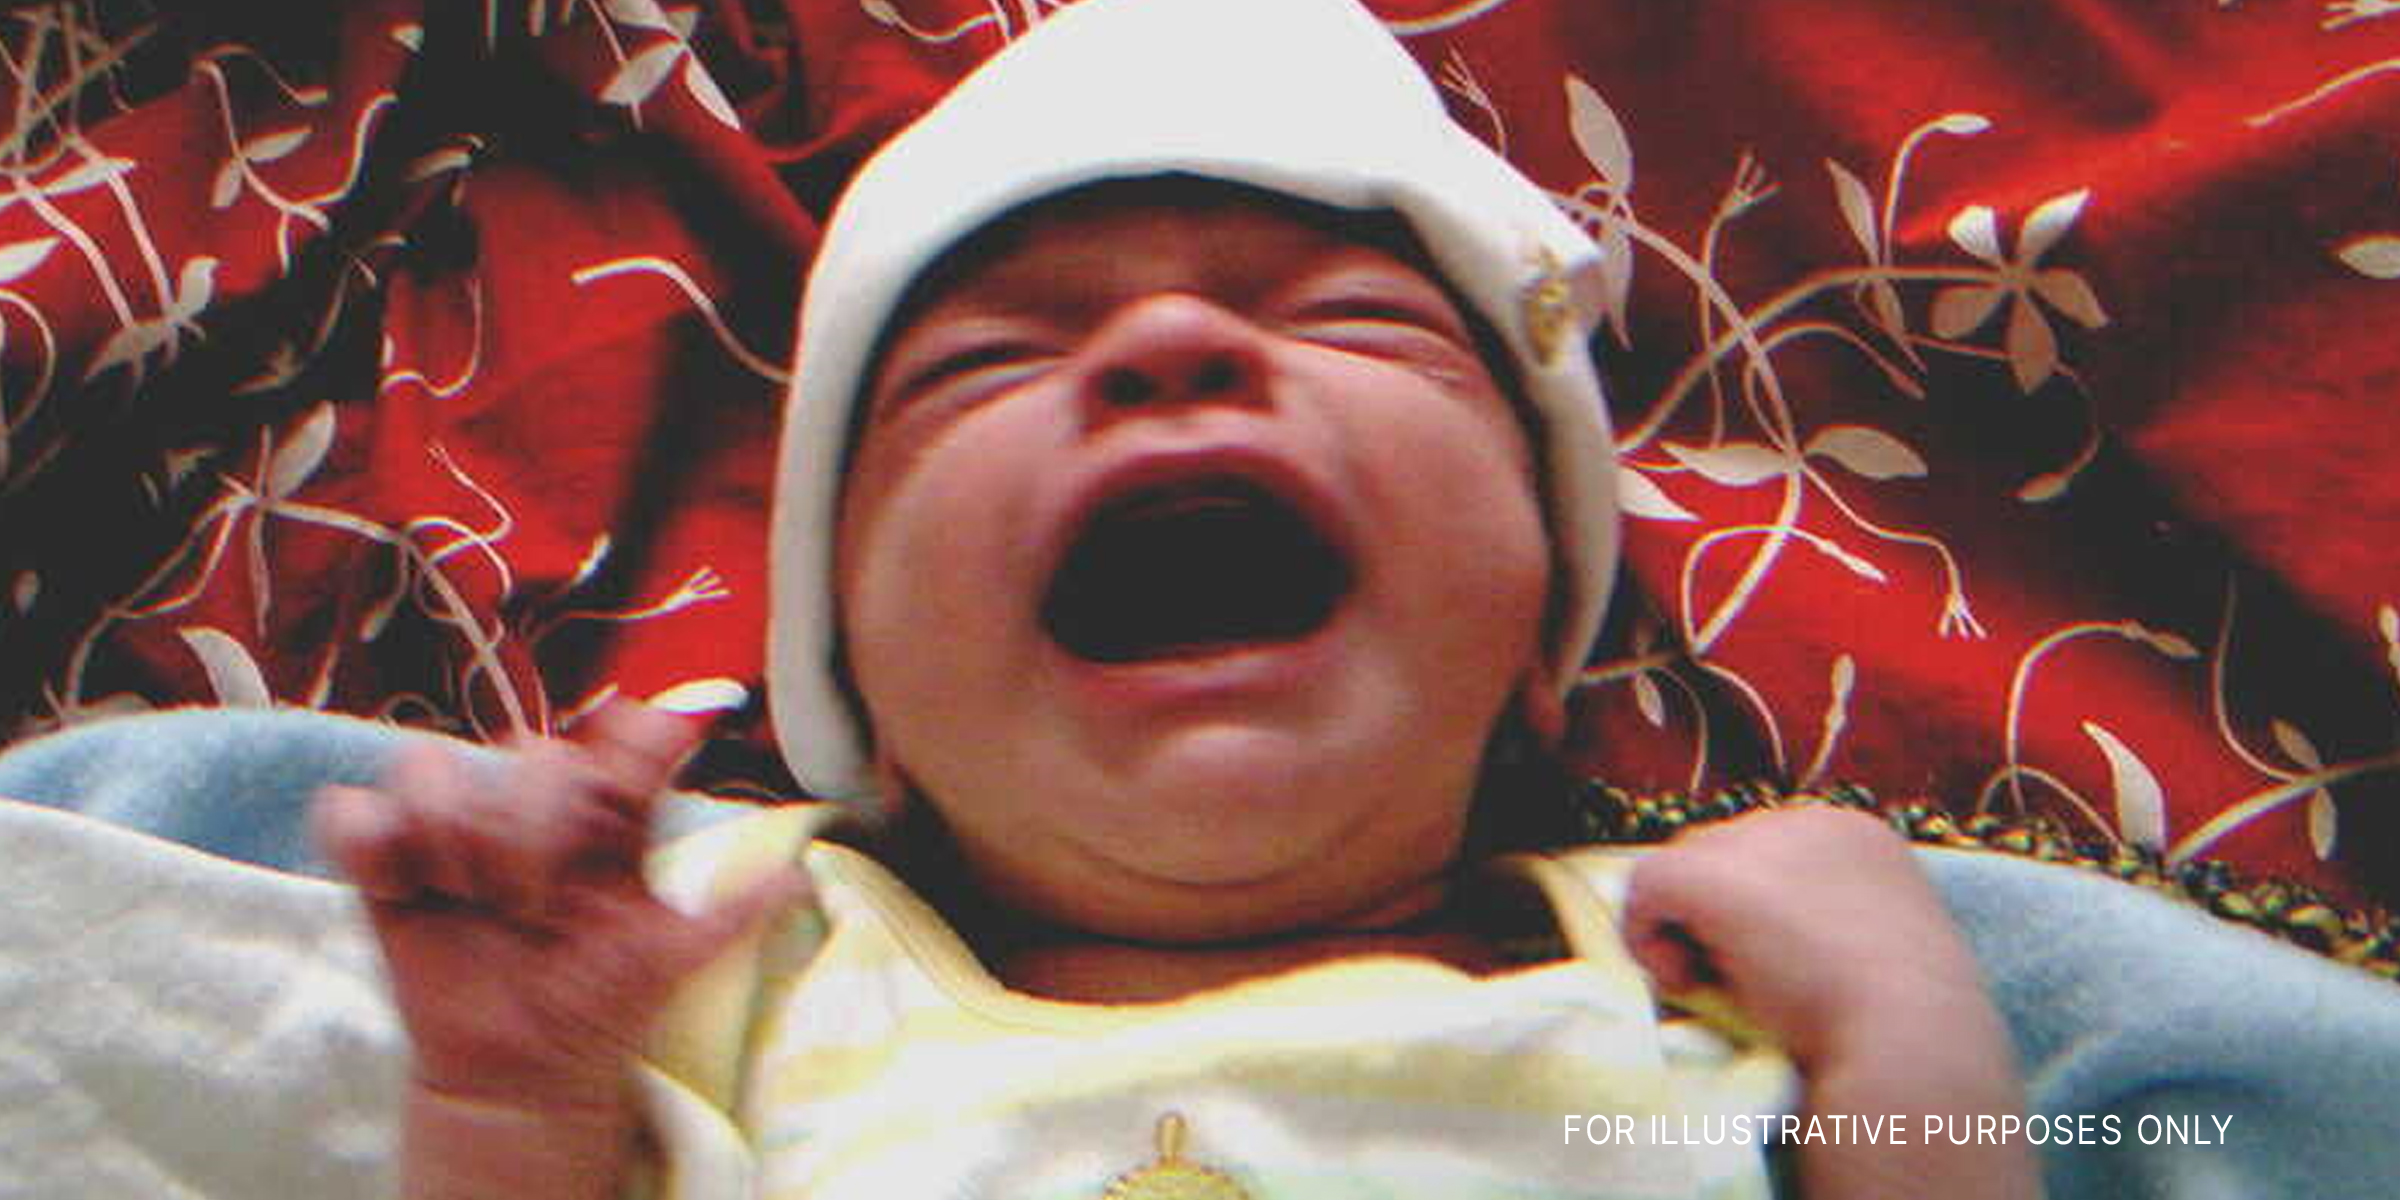 A Newborn Baby Crying | Source: Flickr.com/"Crying" (CC BY-SA 2.0) by rabble